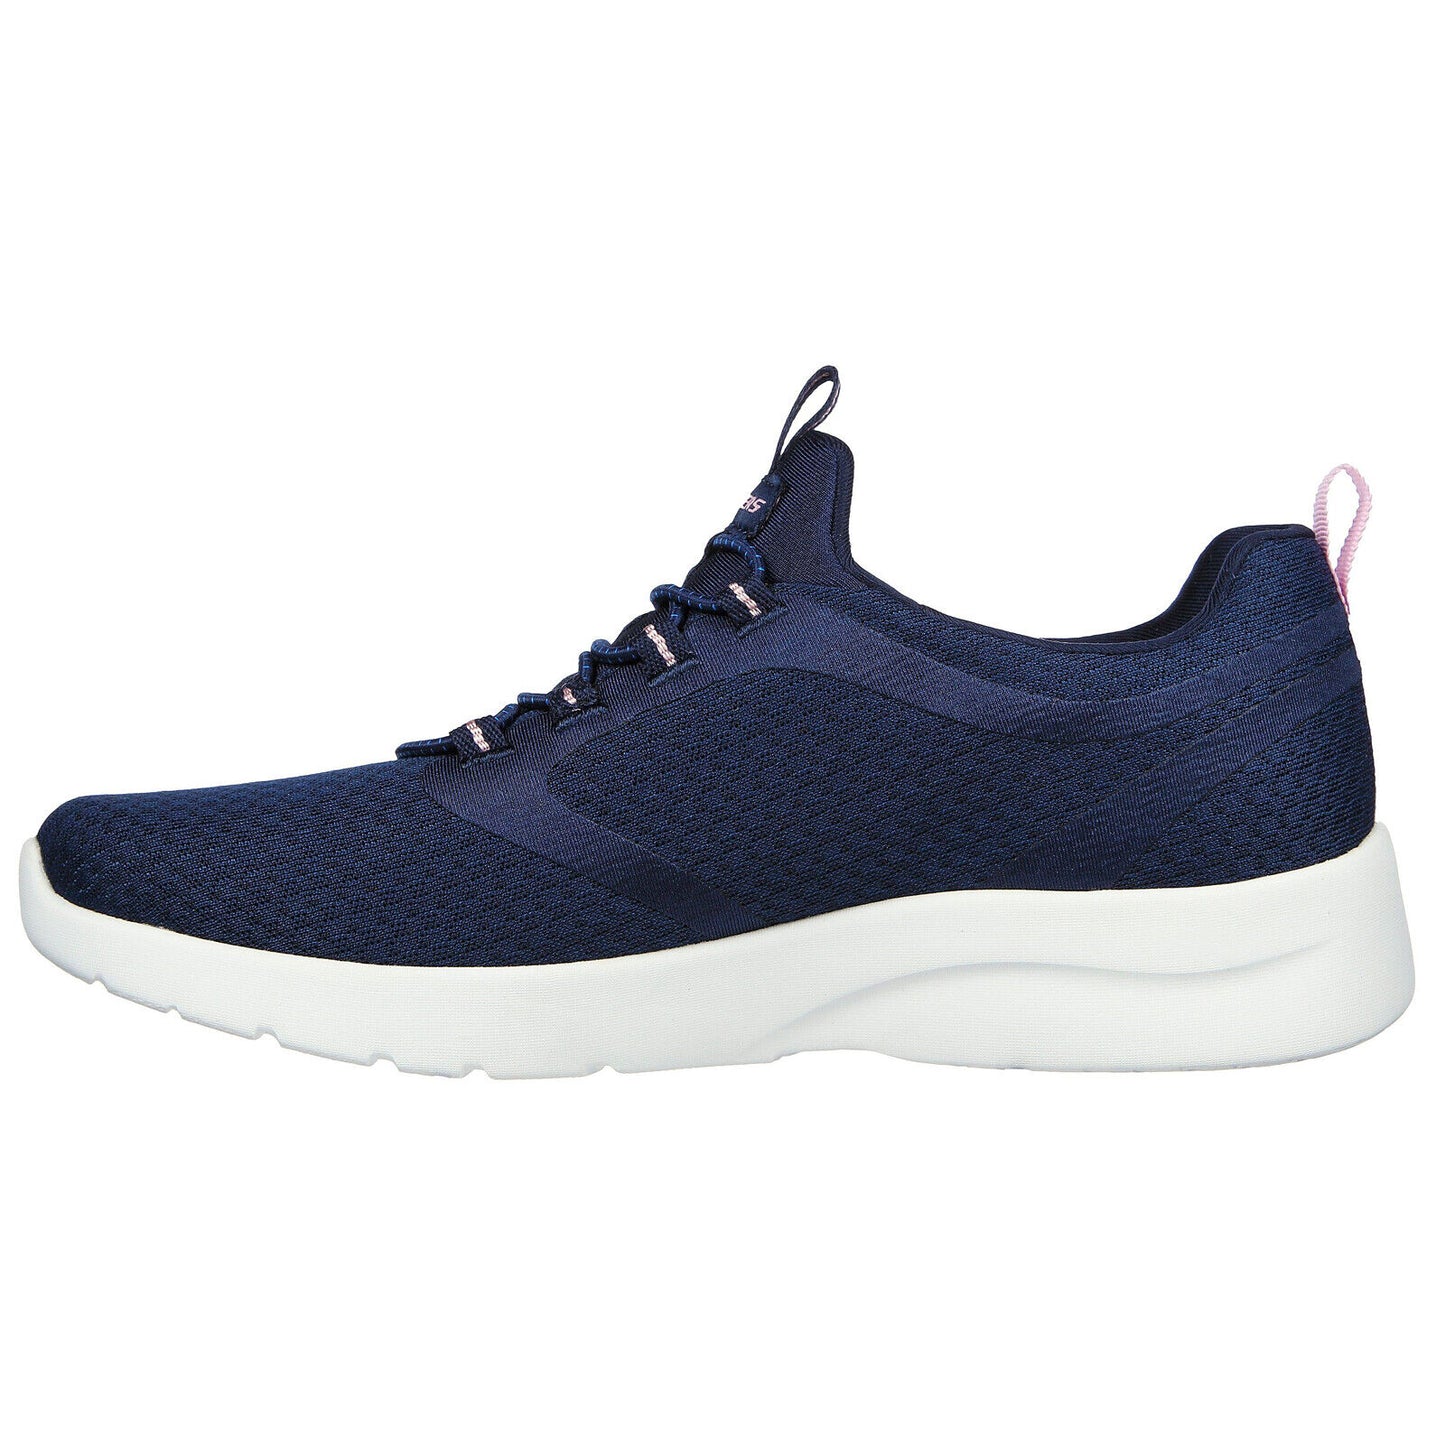 Skechers Ladies Dynamight 2.0 Soft Expressions Navy Vegan Trainers Shoes